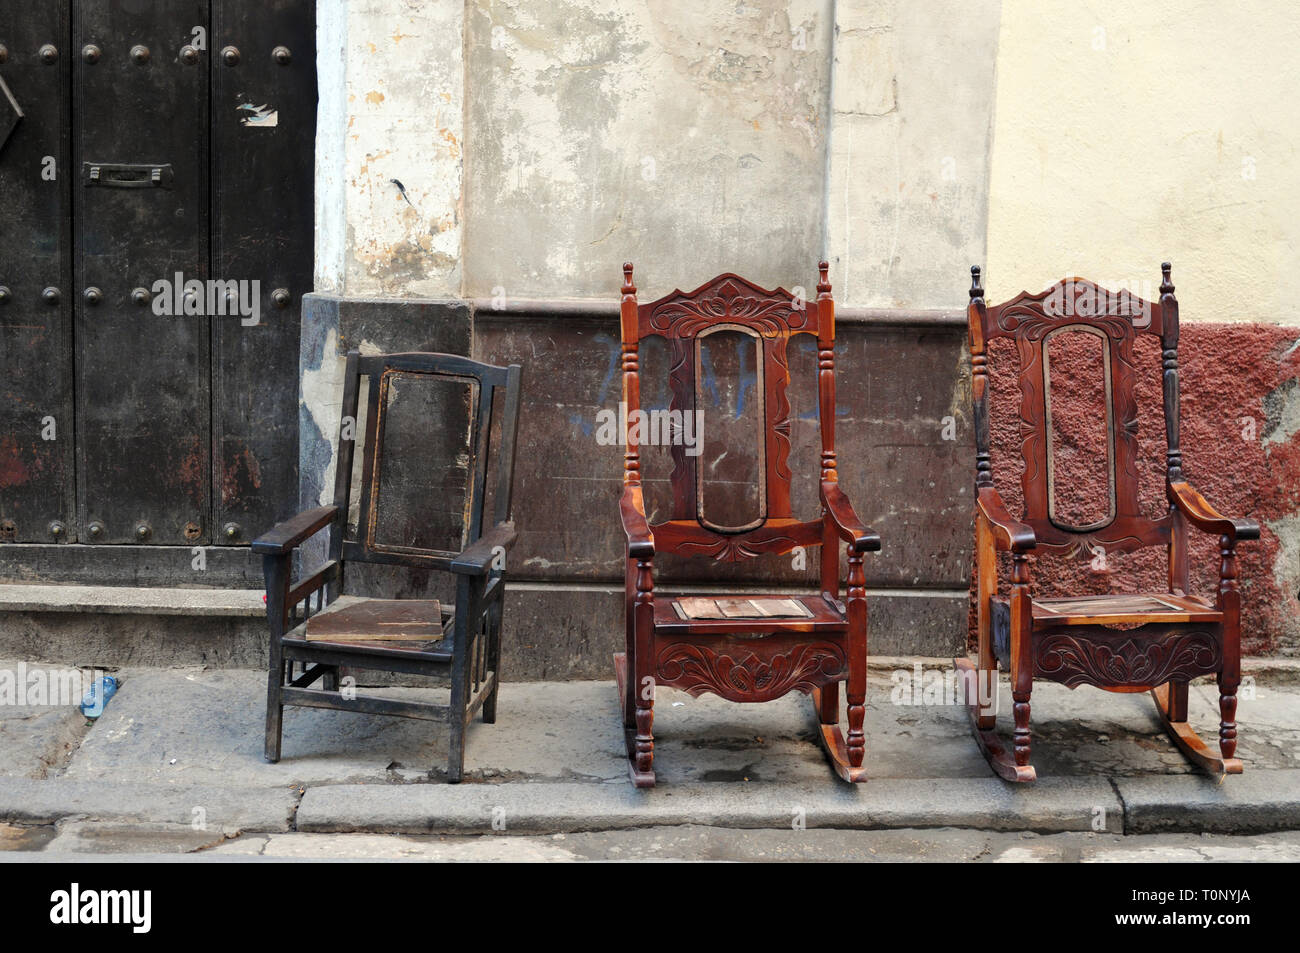 Three wooden chairs sit on a sidewalk in front of a building in Old Havana, Cuba. Stock Photo